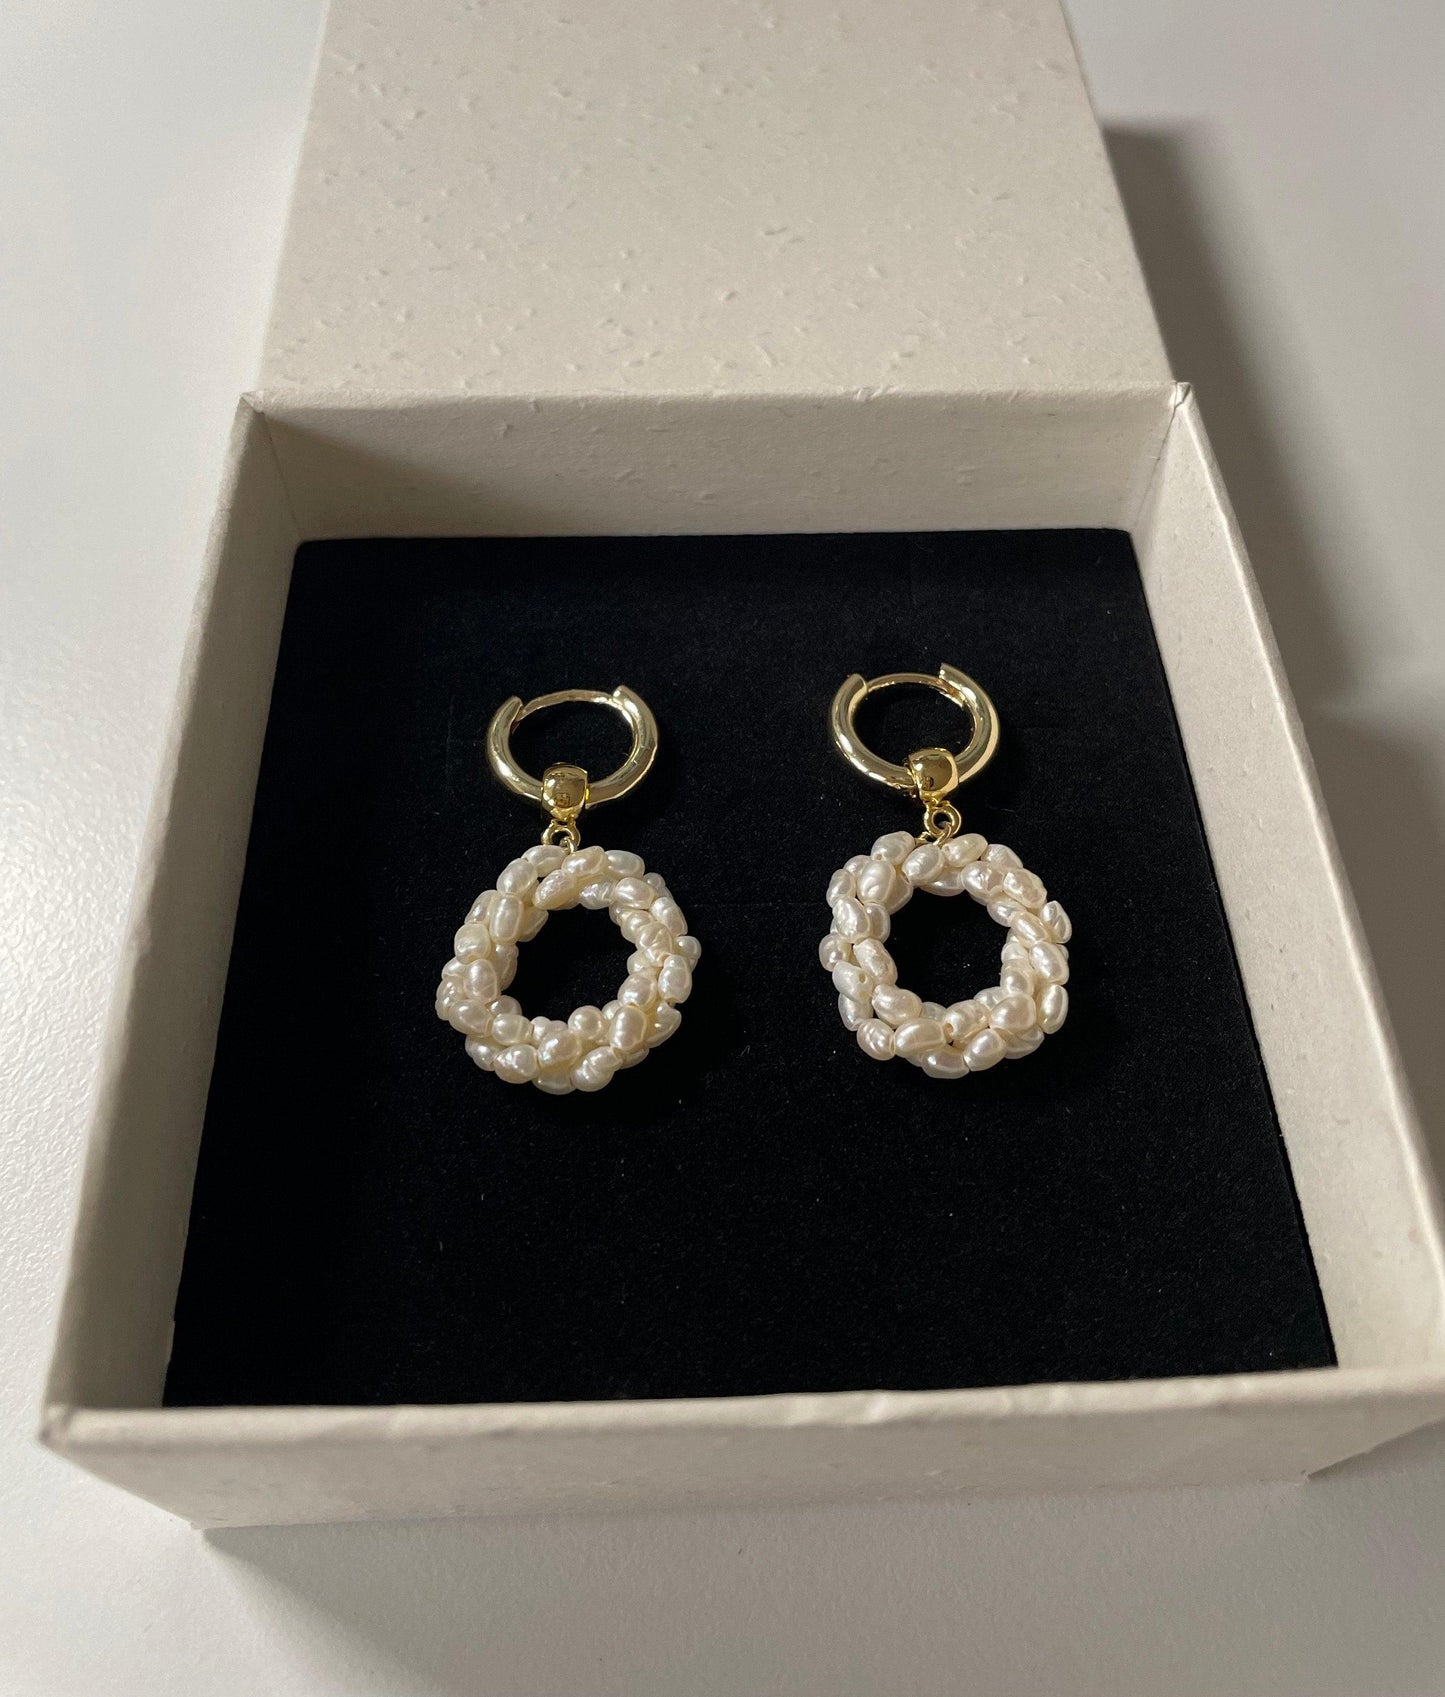 Elegant twisted pearl earrings in 14K gold and freshwater rice pearls - LE´TIAN